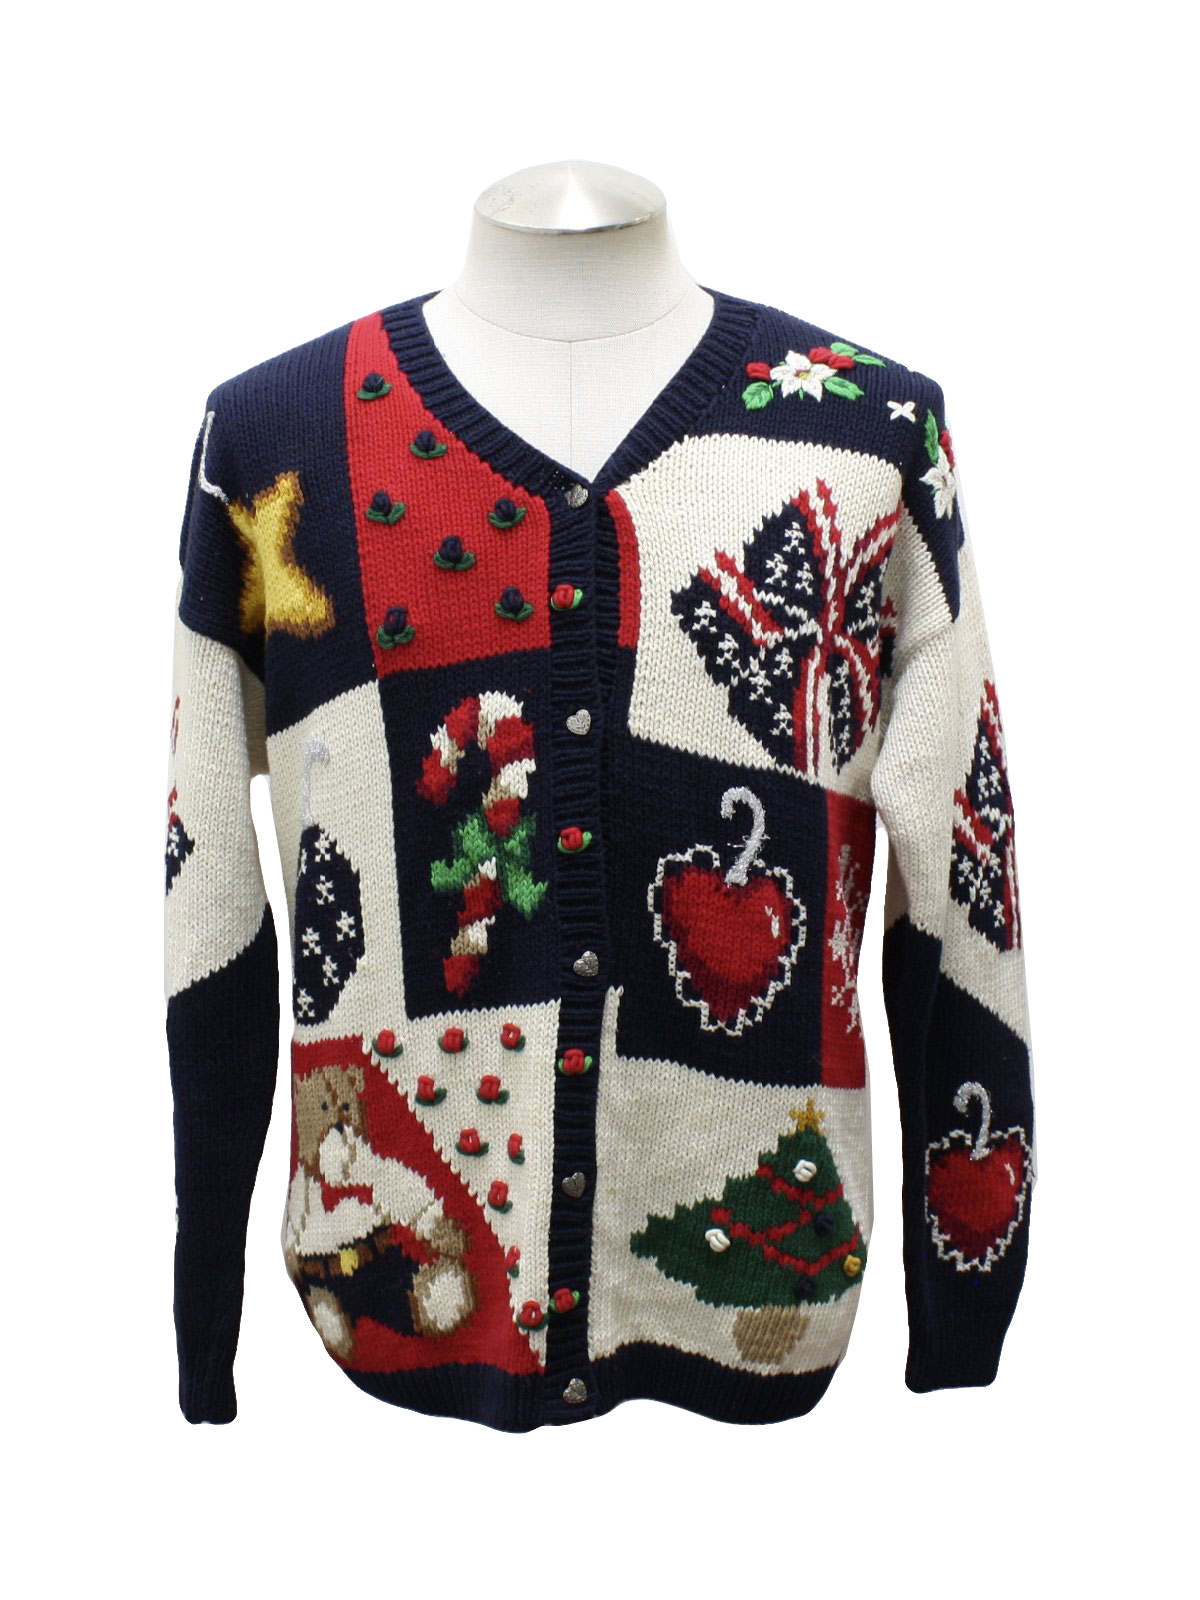 Hideously Ugly Christmas Sweater: -The Eagles Eye- Zoinks! It looks